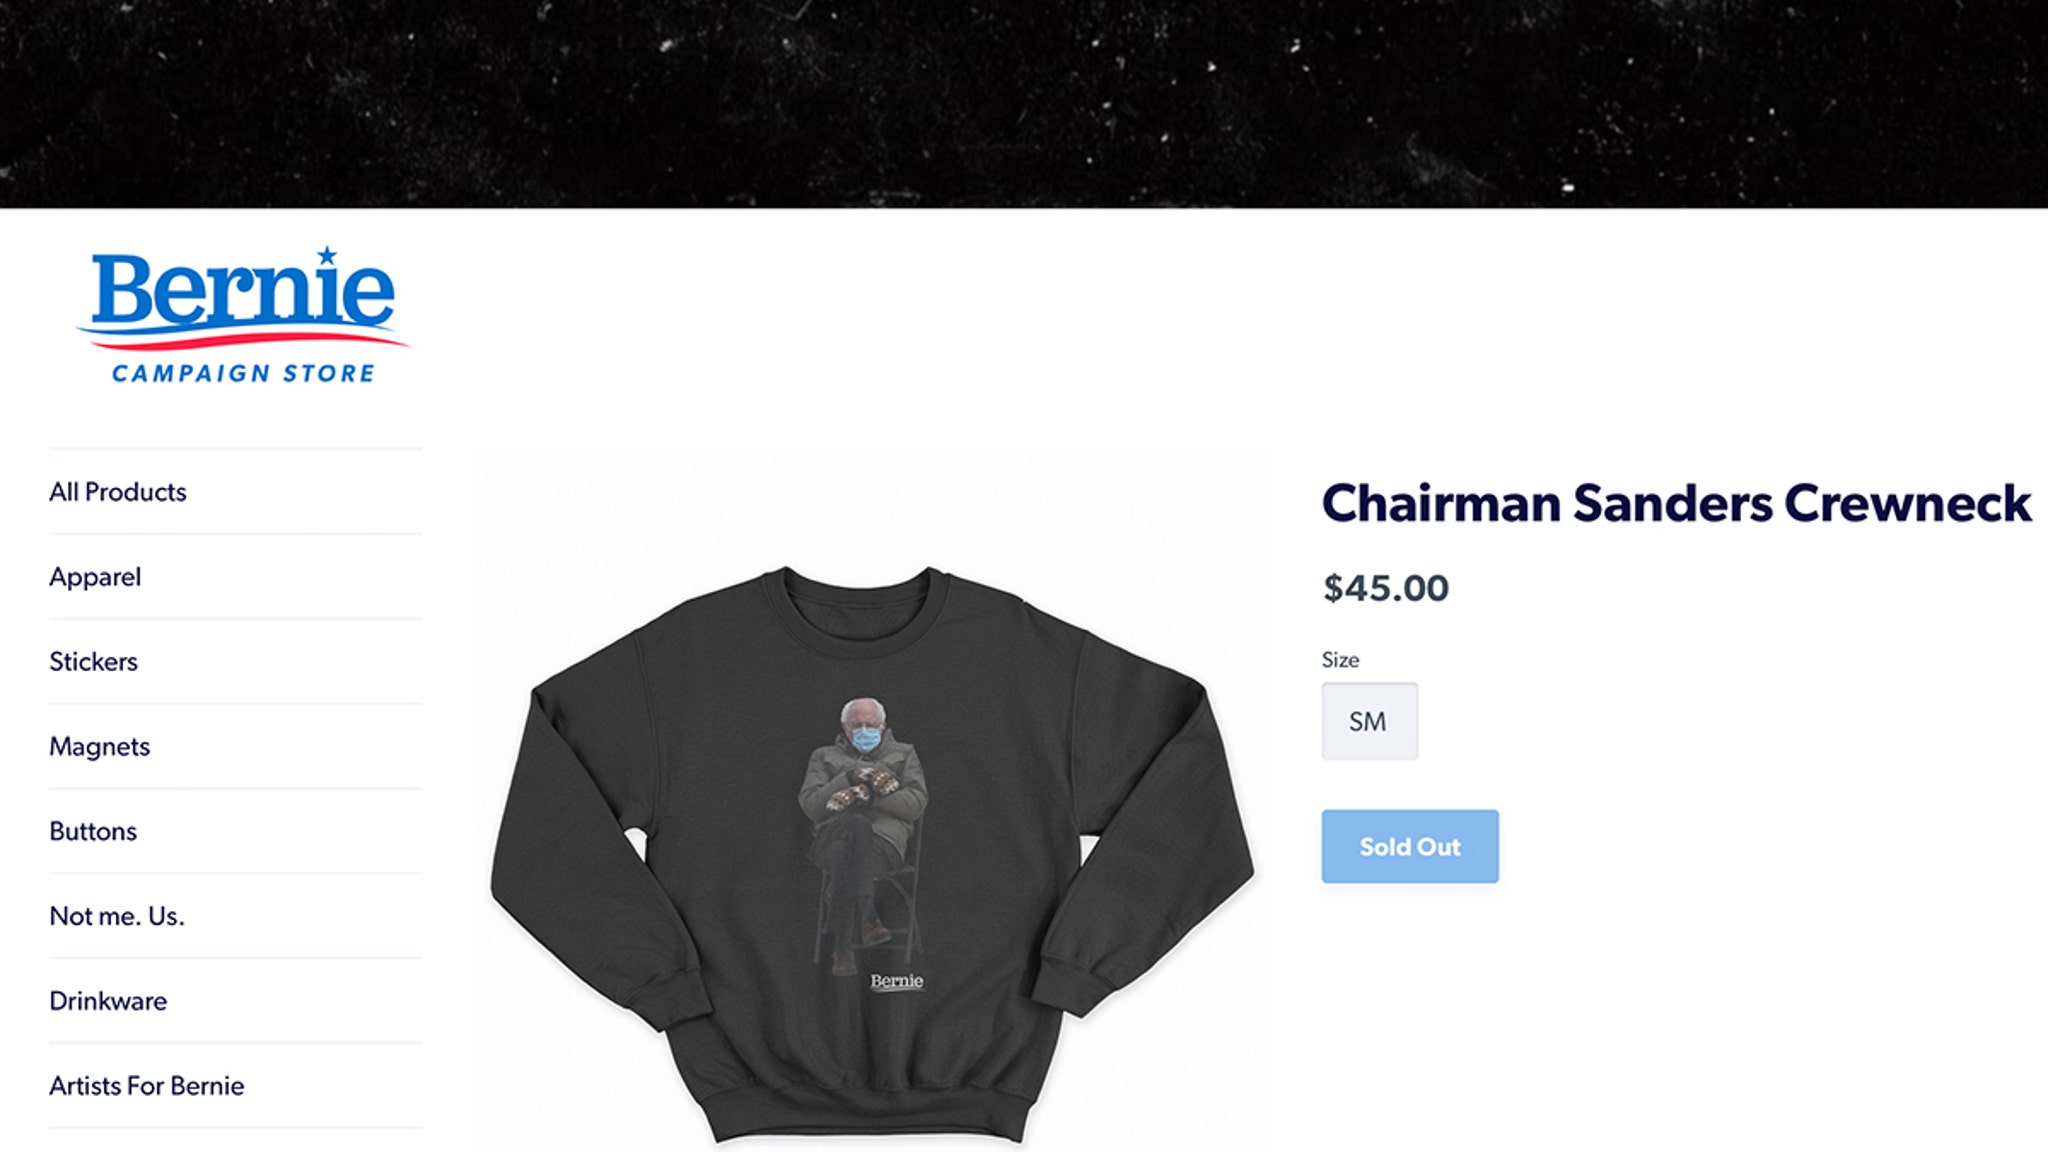 Bernie Sanders Inauguration Meme Sweatshirts Sell Out Fast image picture